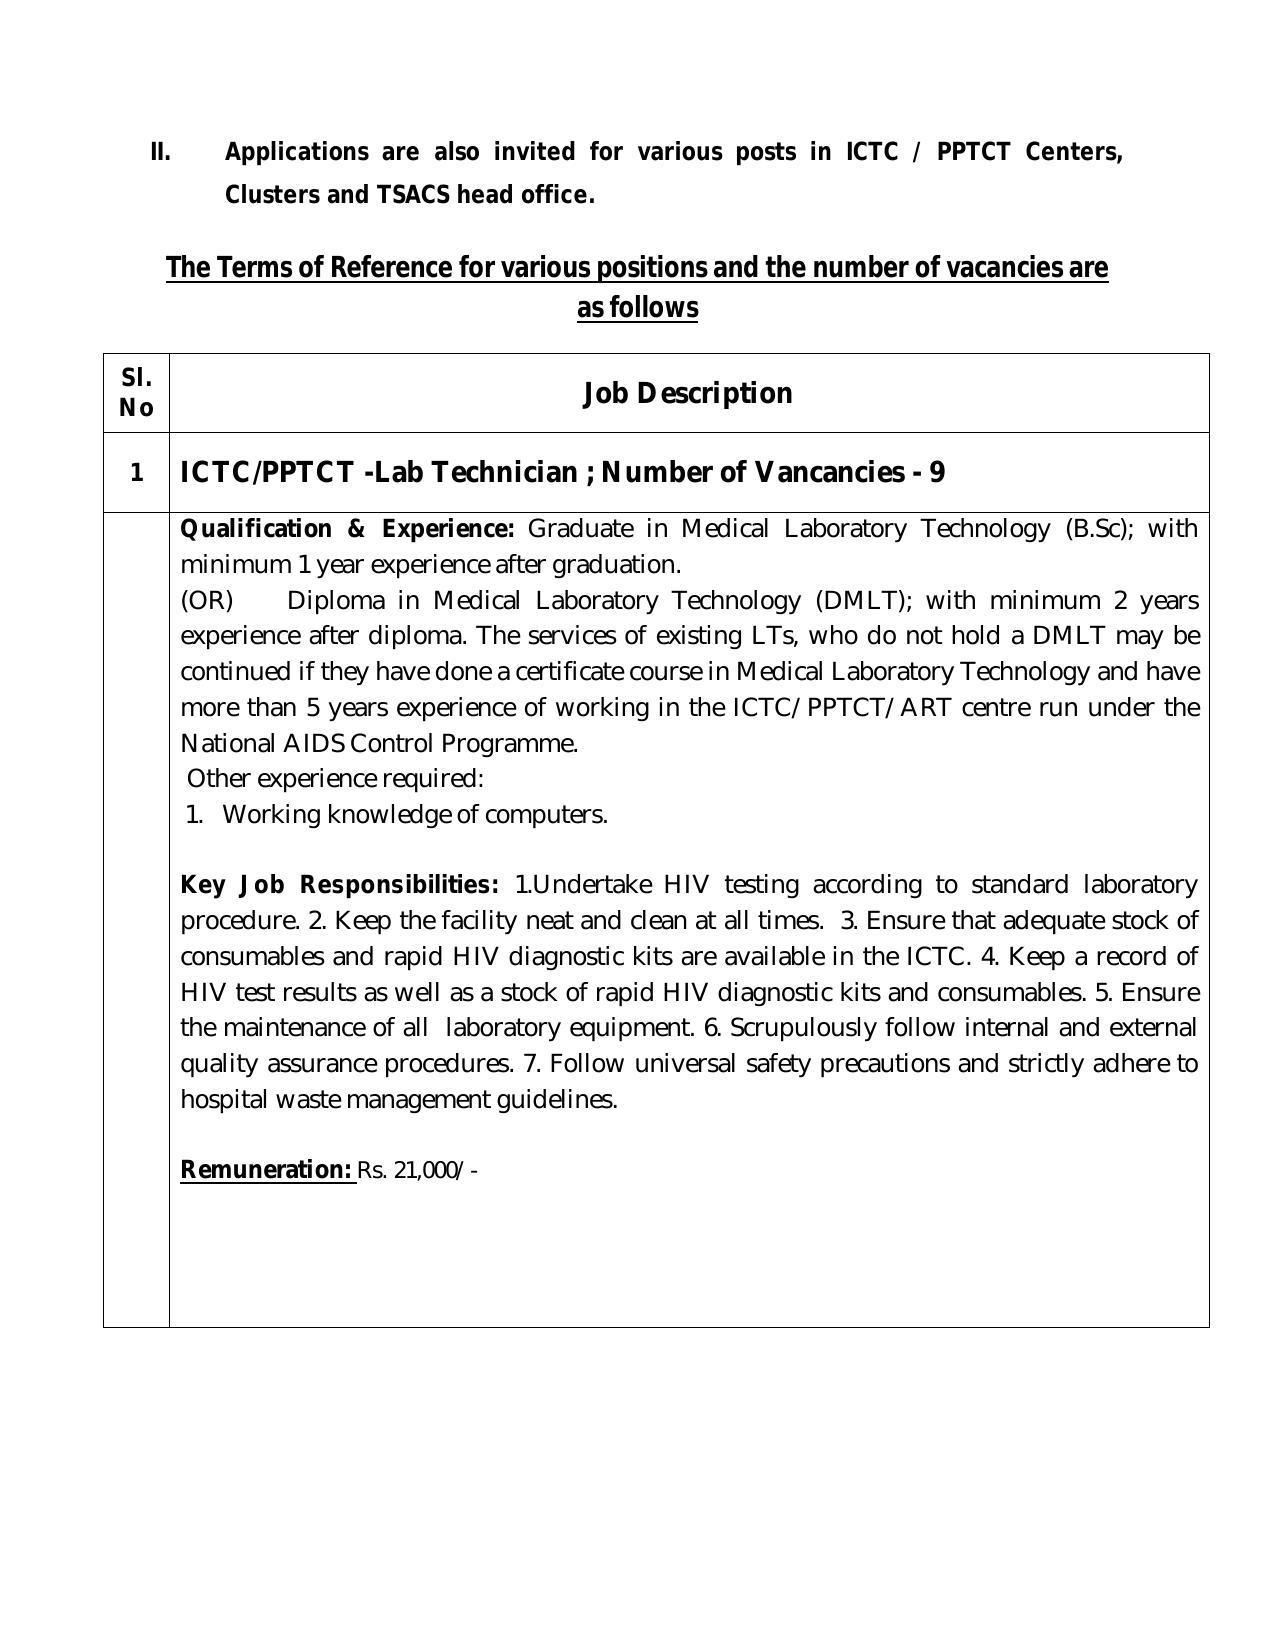 ART Centers Telangana Invites Application for Medical Officer, Staff Nurse, More Vacancies Recruitment 2022 - Page 10